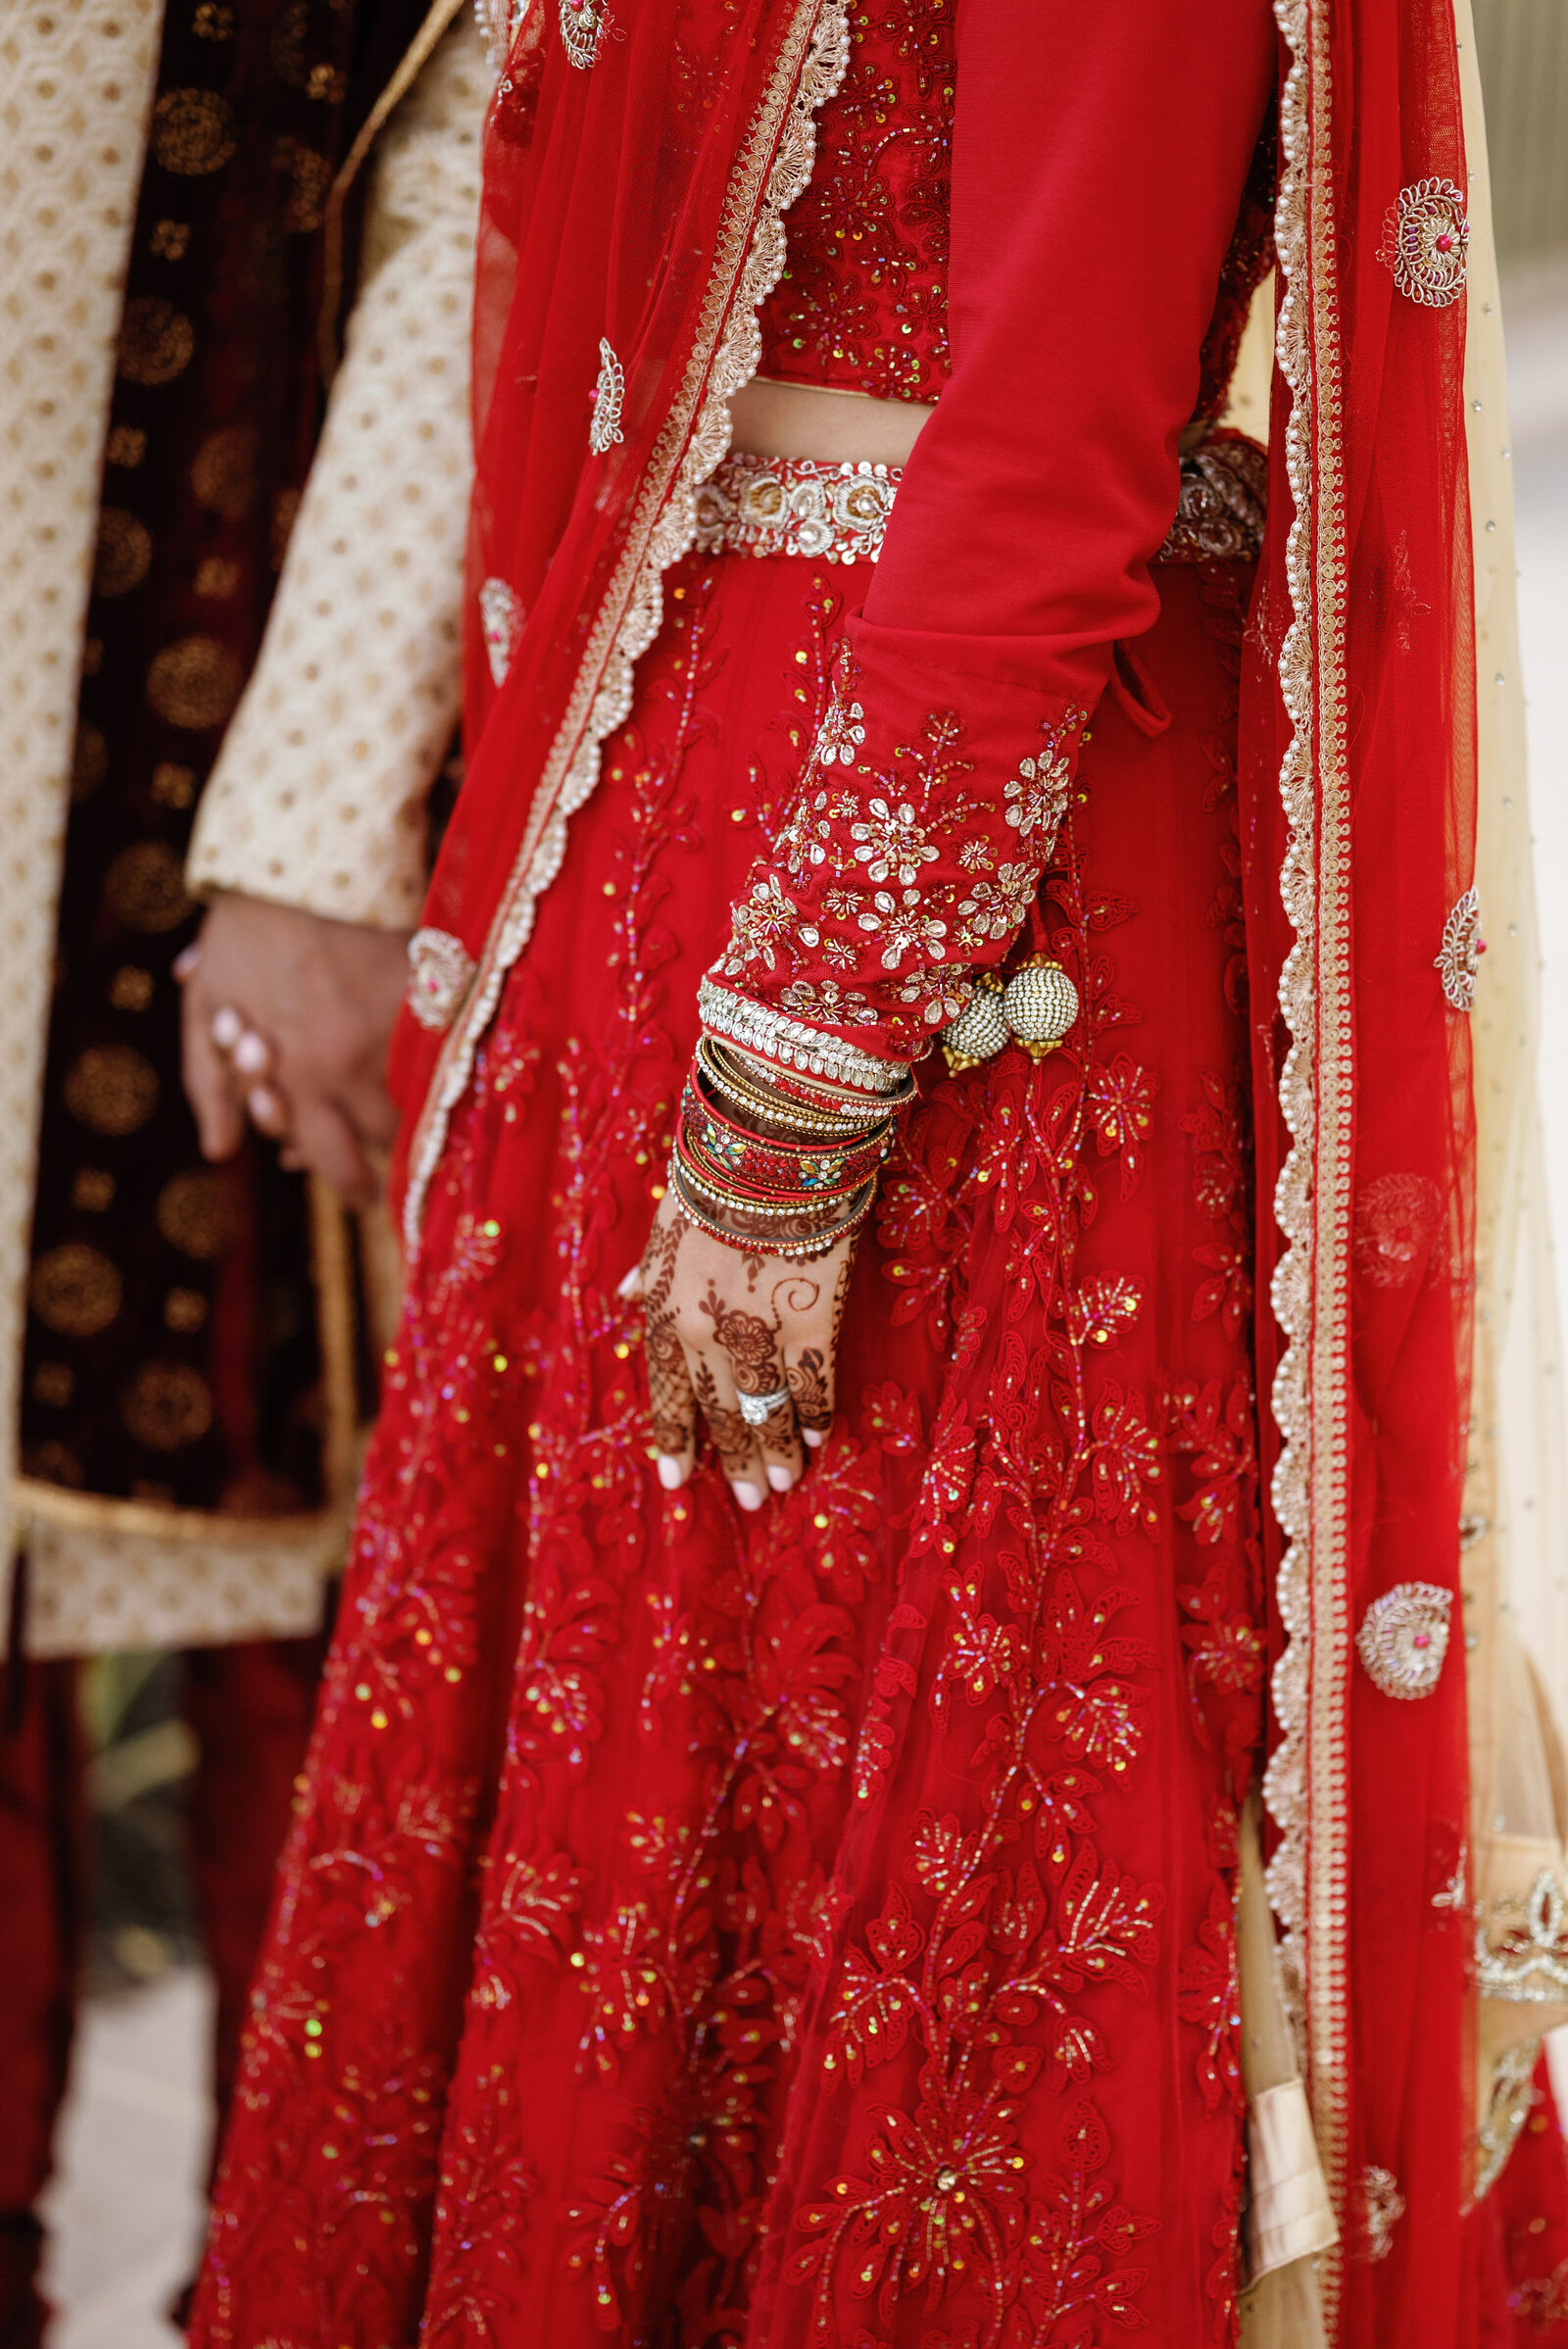 detail of Indian brides hand against her red sari. Her bracelets and the texture of her sari are on display